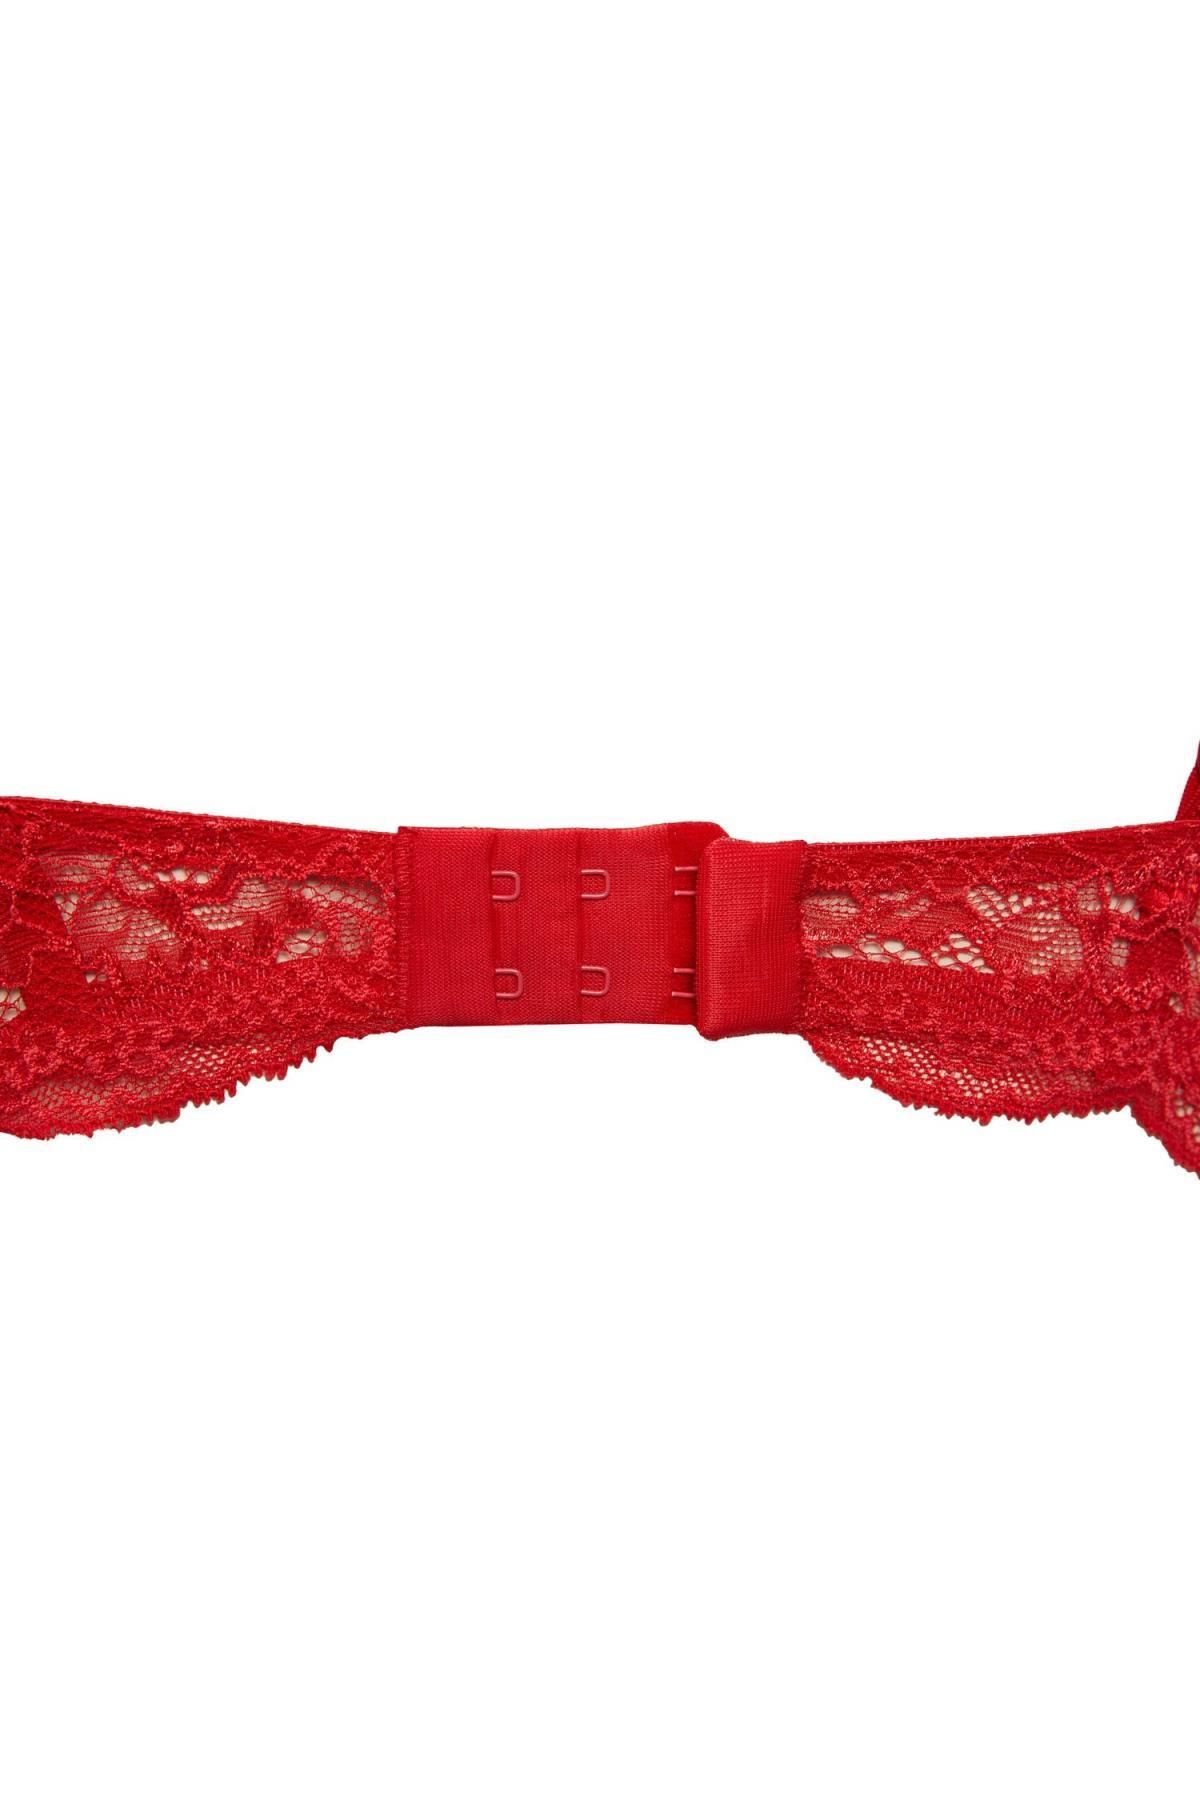 Defacto Fall In Love Lace Capless Non-Pad Red Bra - Trendyol